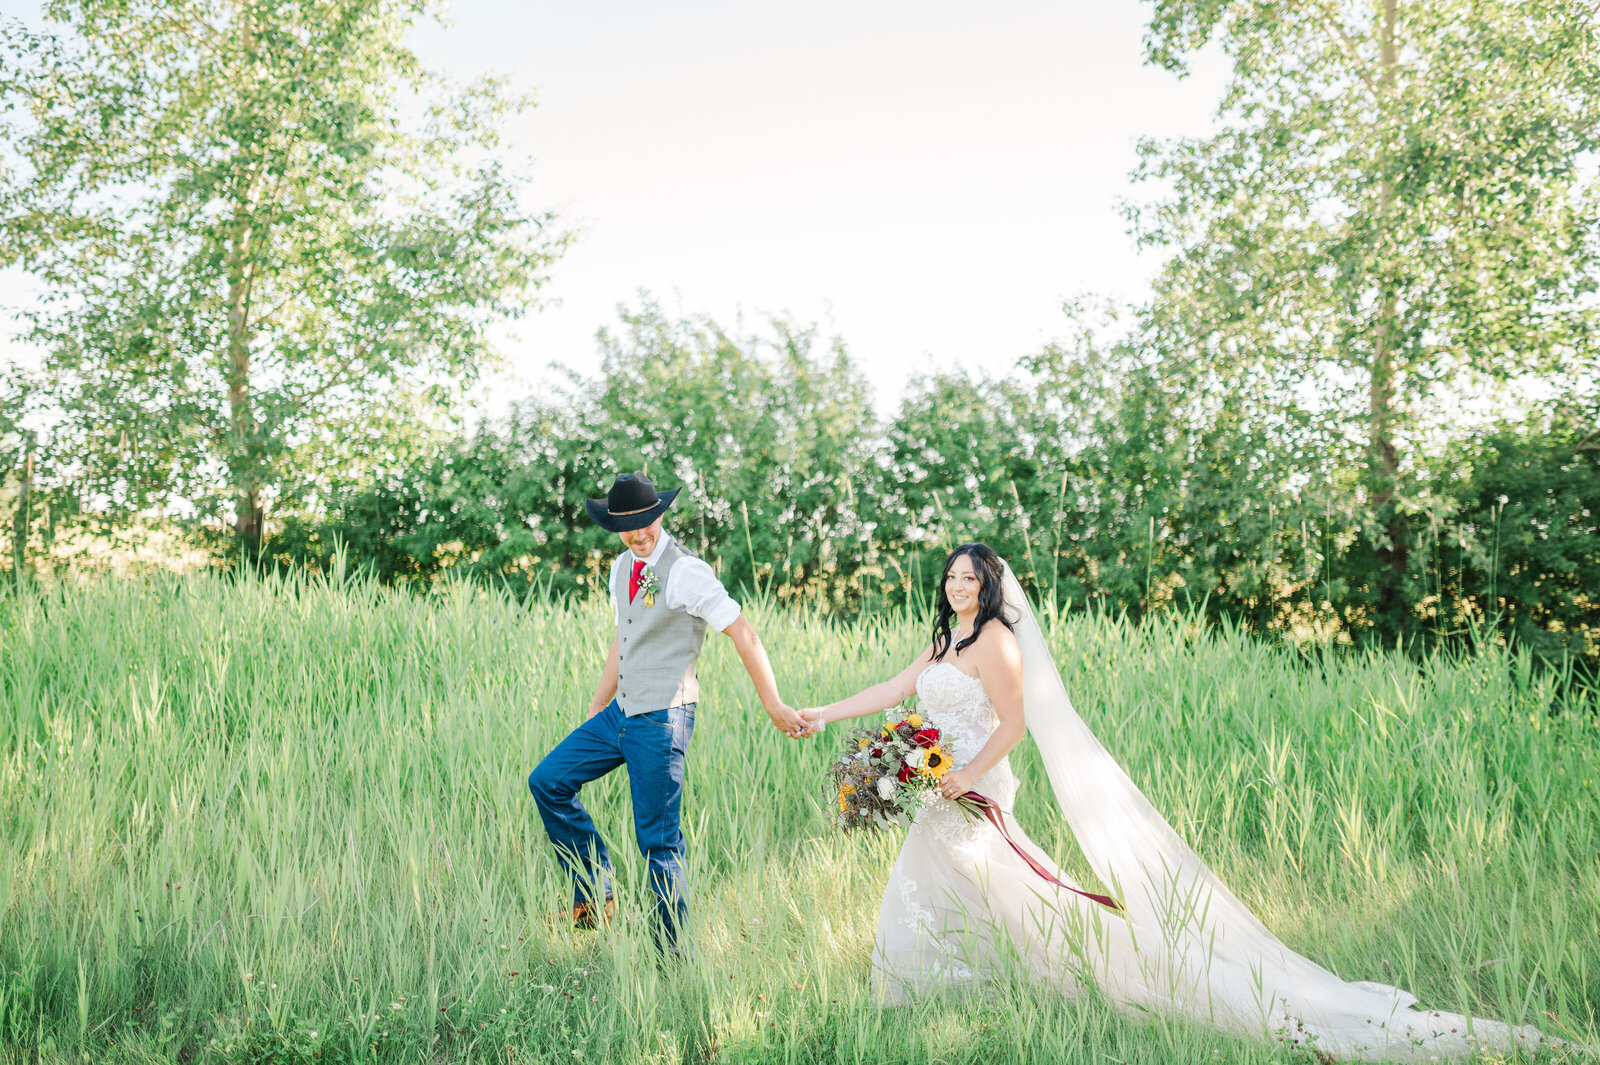 Cork and Crate Farms, Olds Alberta Wedding Venue